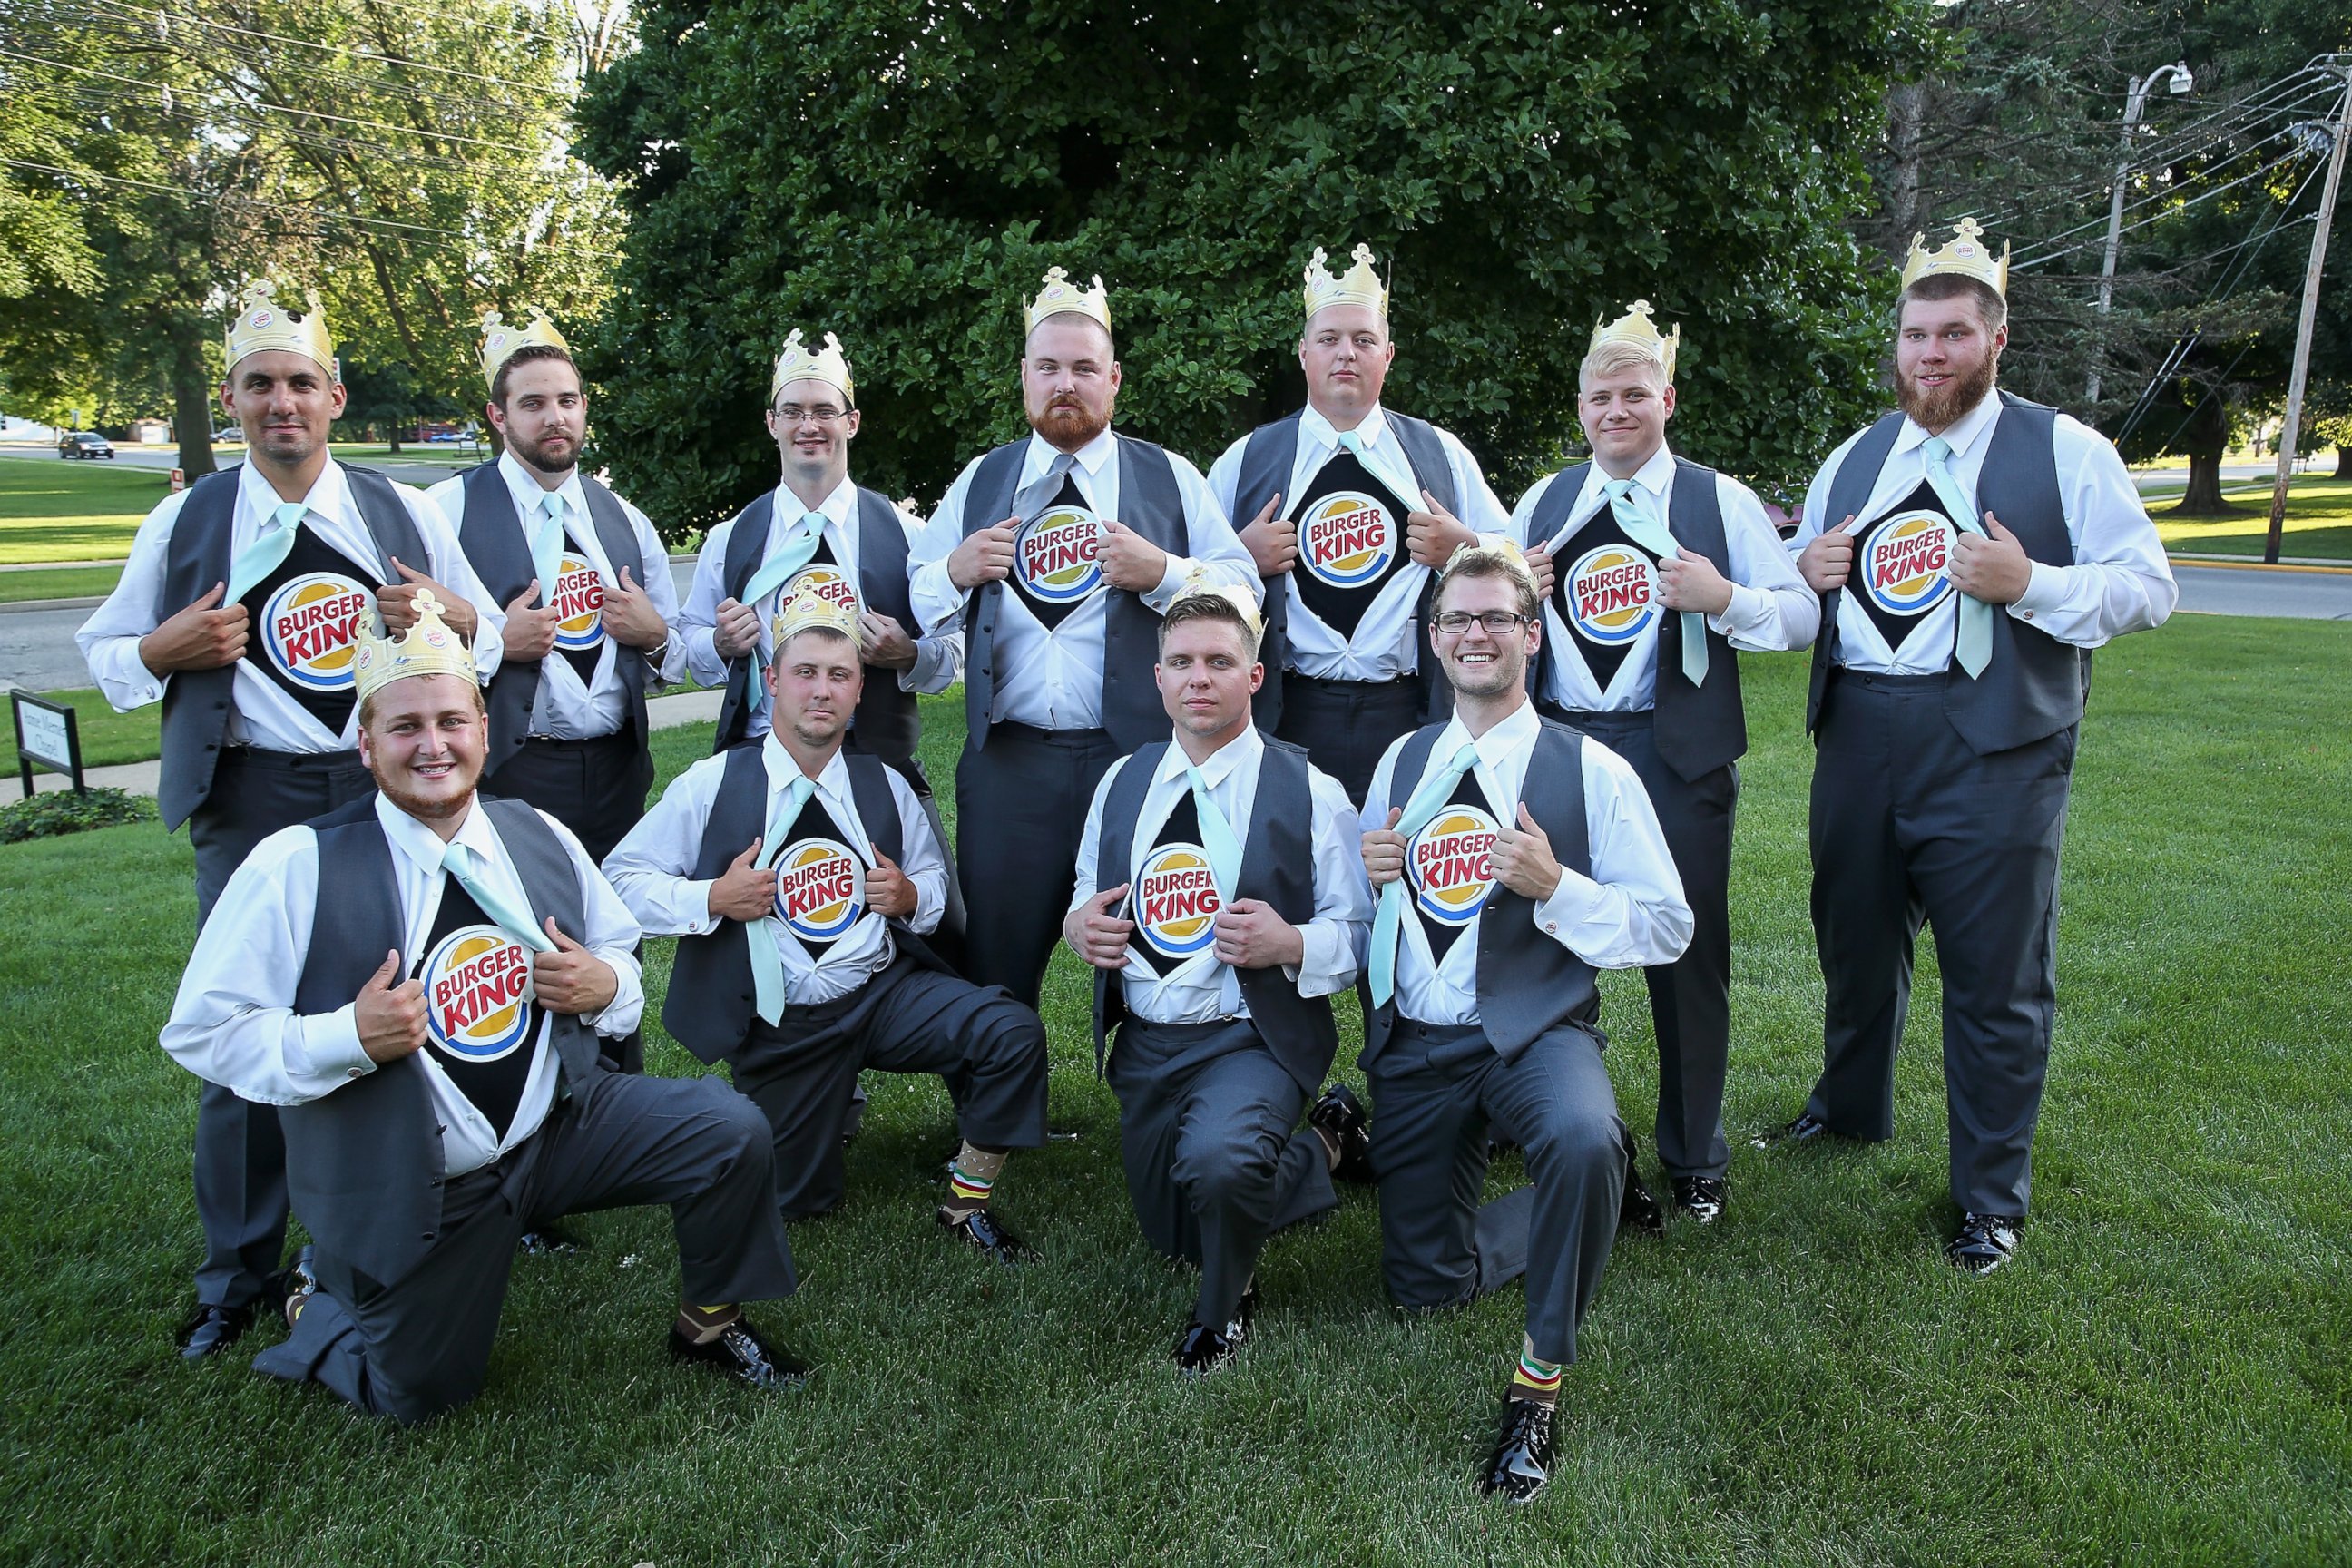 PHOTO: The groomsmen display their Burger King t-shirts at the wedding of Ashley King and Joel Burger on July 17, 2015 in Jacksonville, Ill. 